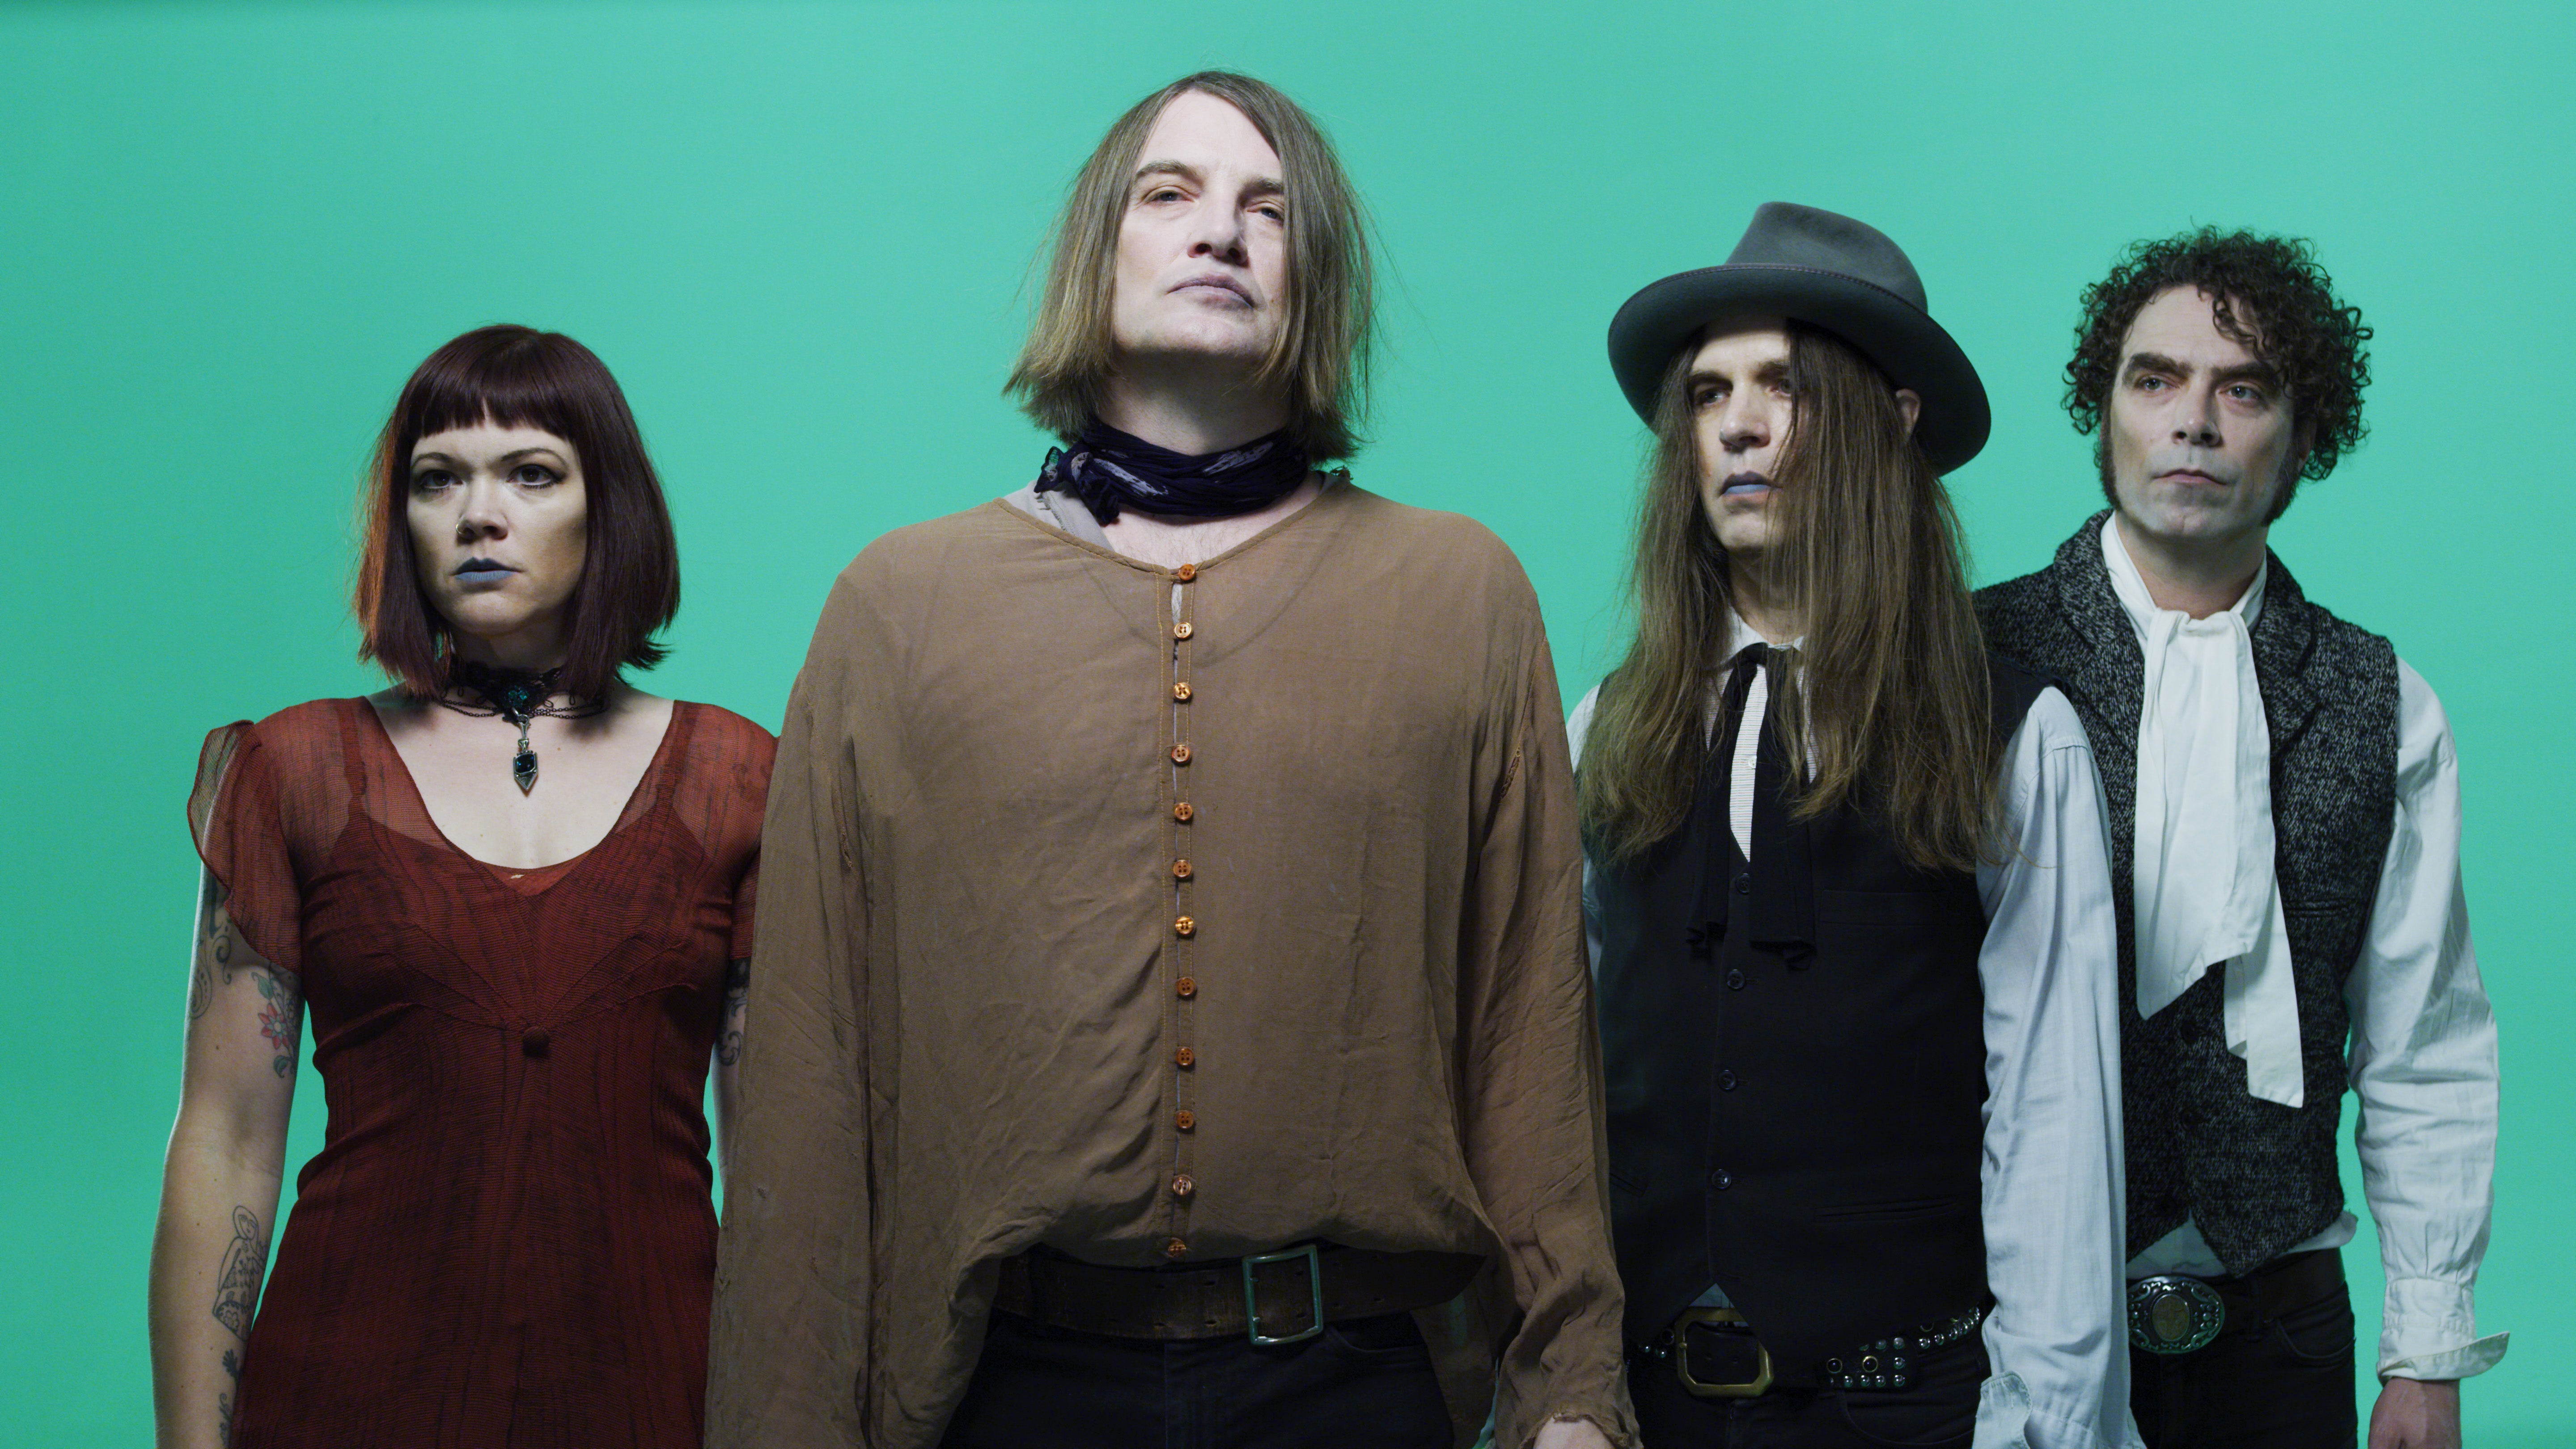 The Dandy Warhols + The Black Angels in Bristol promo photo for Priority from O2 presale offer code